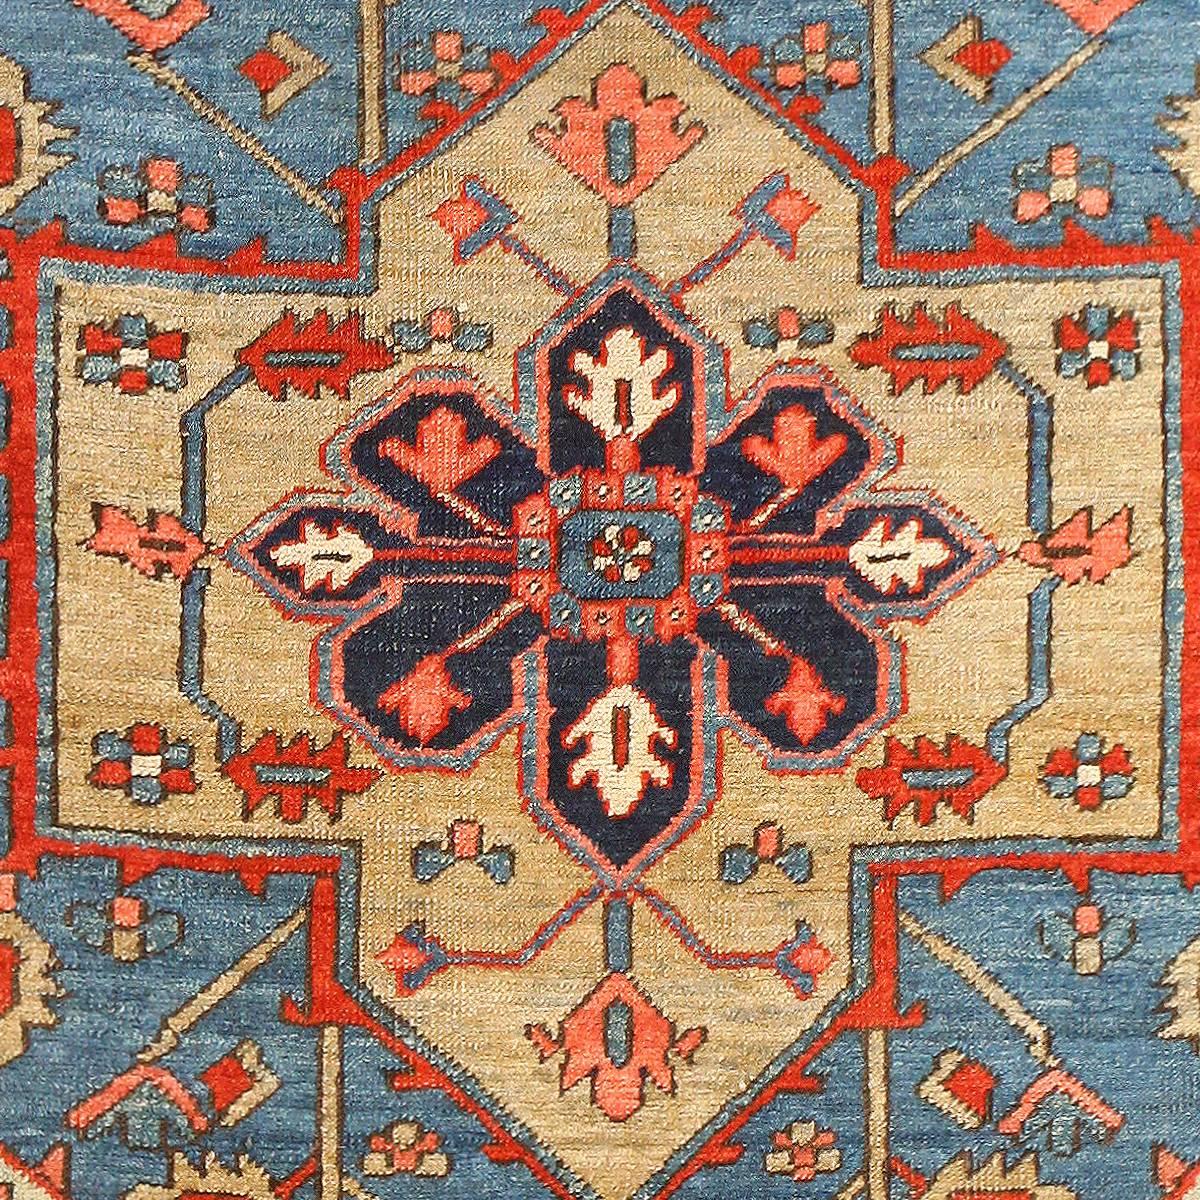 The carpets of northwest Persia are in a class of their own. Prized for their strong geometric style, fine construction and rich colors, the carpets of Heriz, Serapi and Bakshaish are regional cousins that share mutual origins.

These northwestern